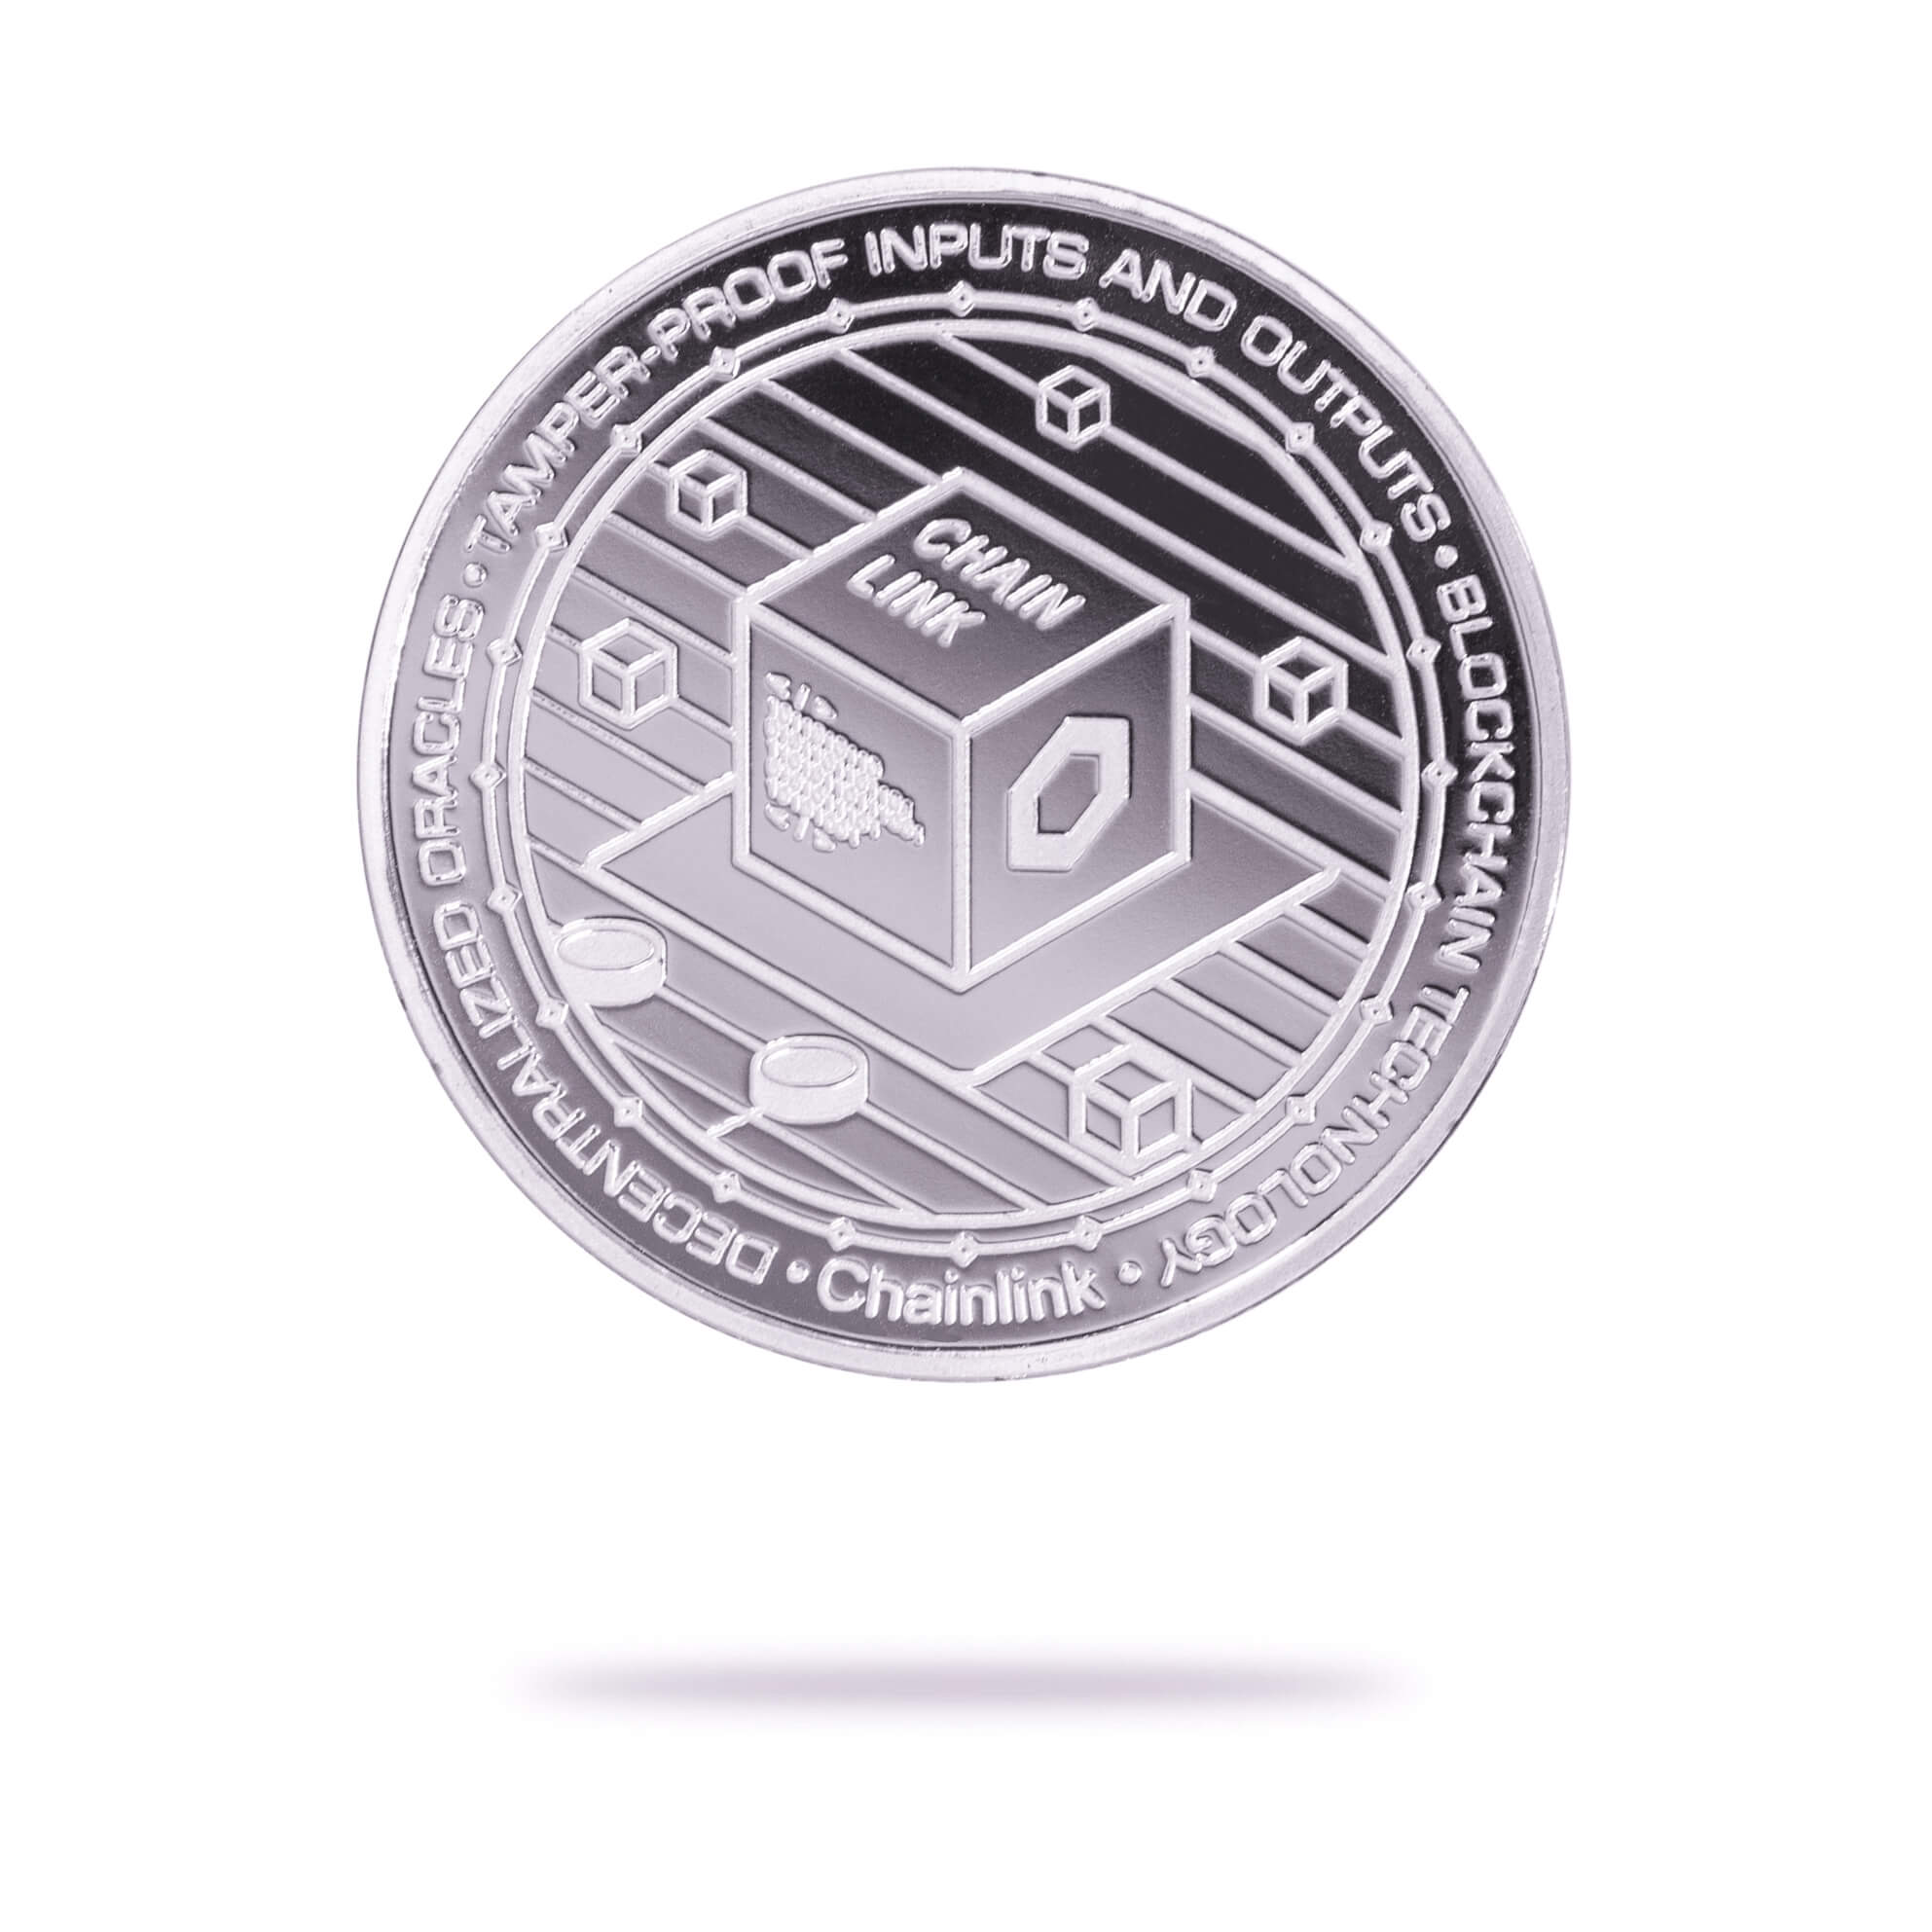 Cryptochips | Chainlink Physical Crypto Coin. Collectable cryptocurrency merch you can hodl